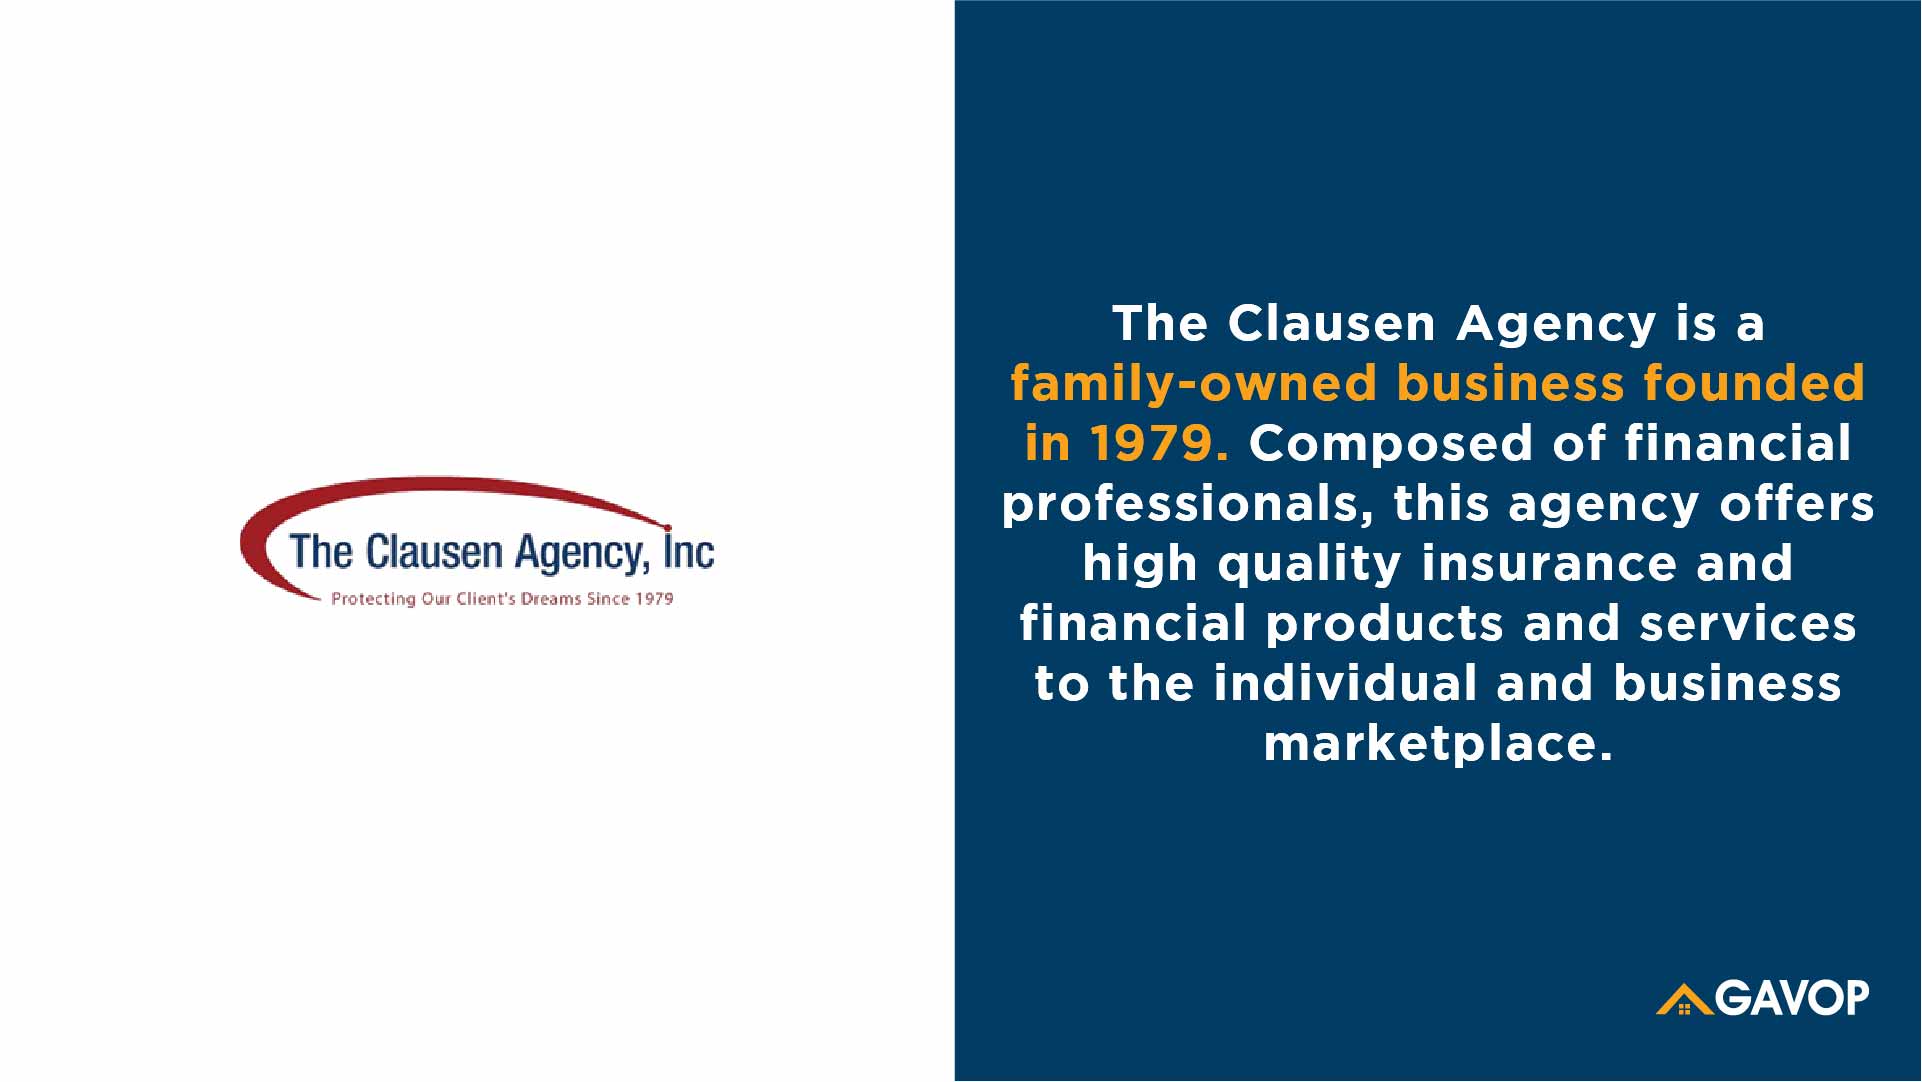 The Clausen Agency Inc